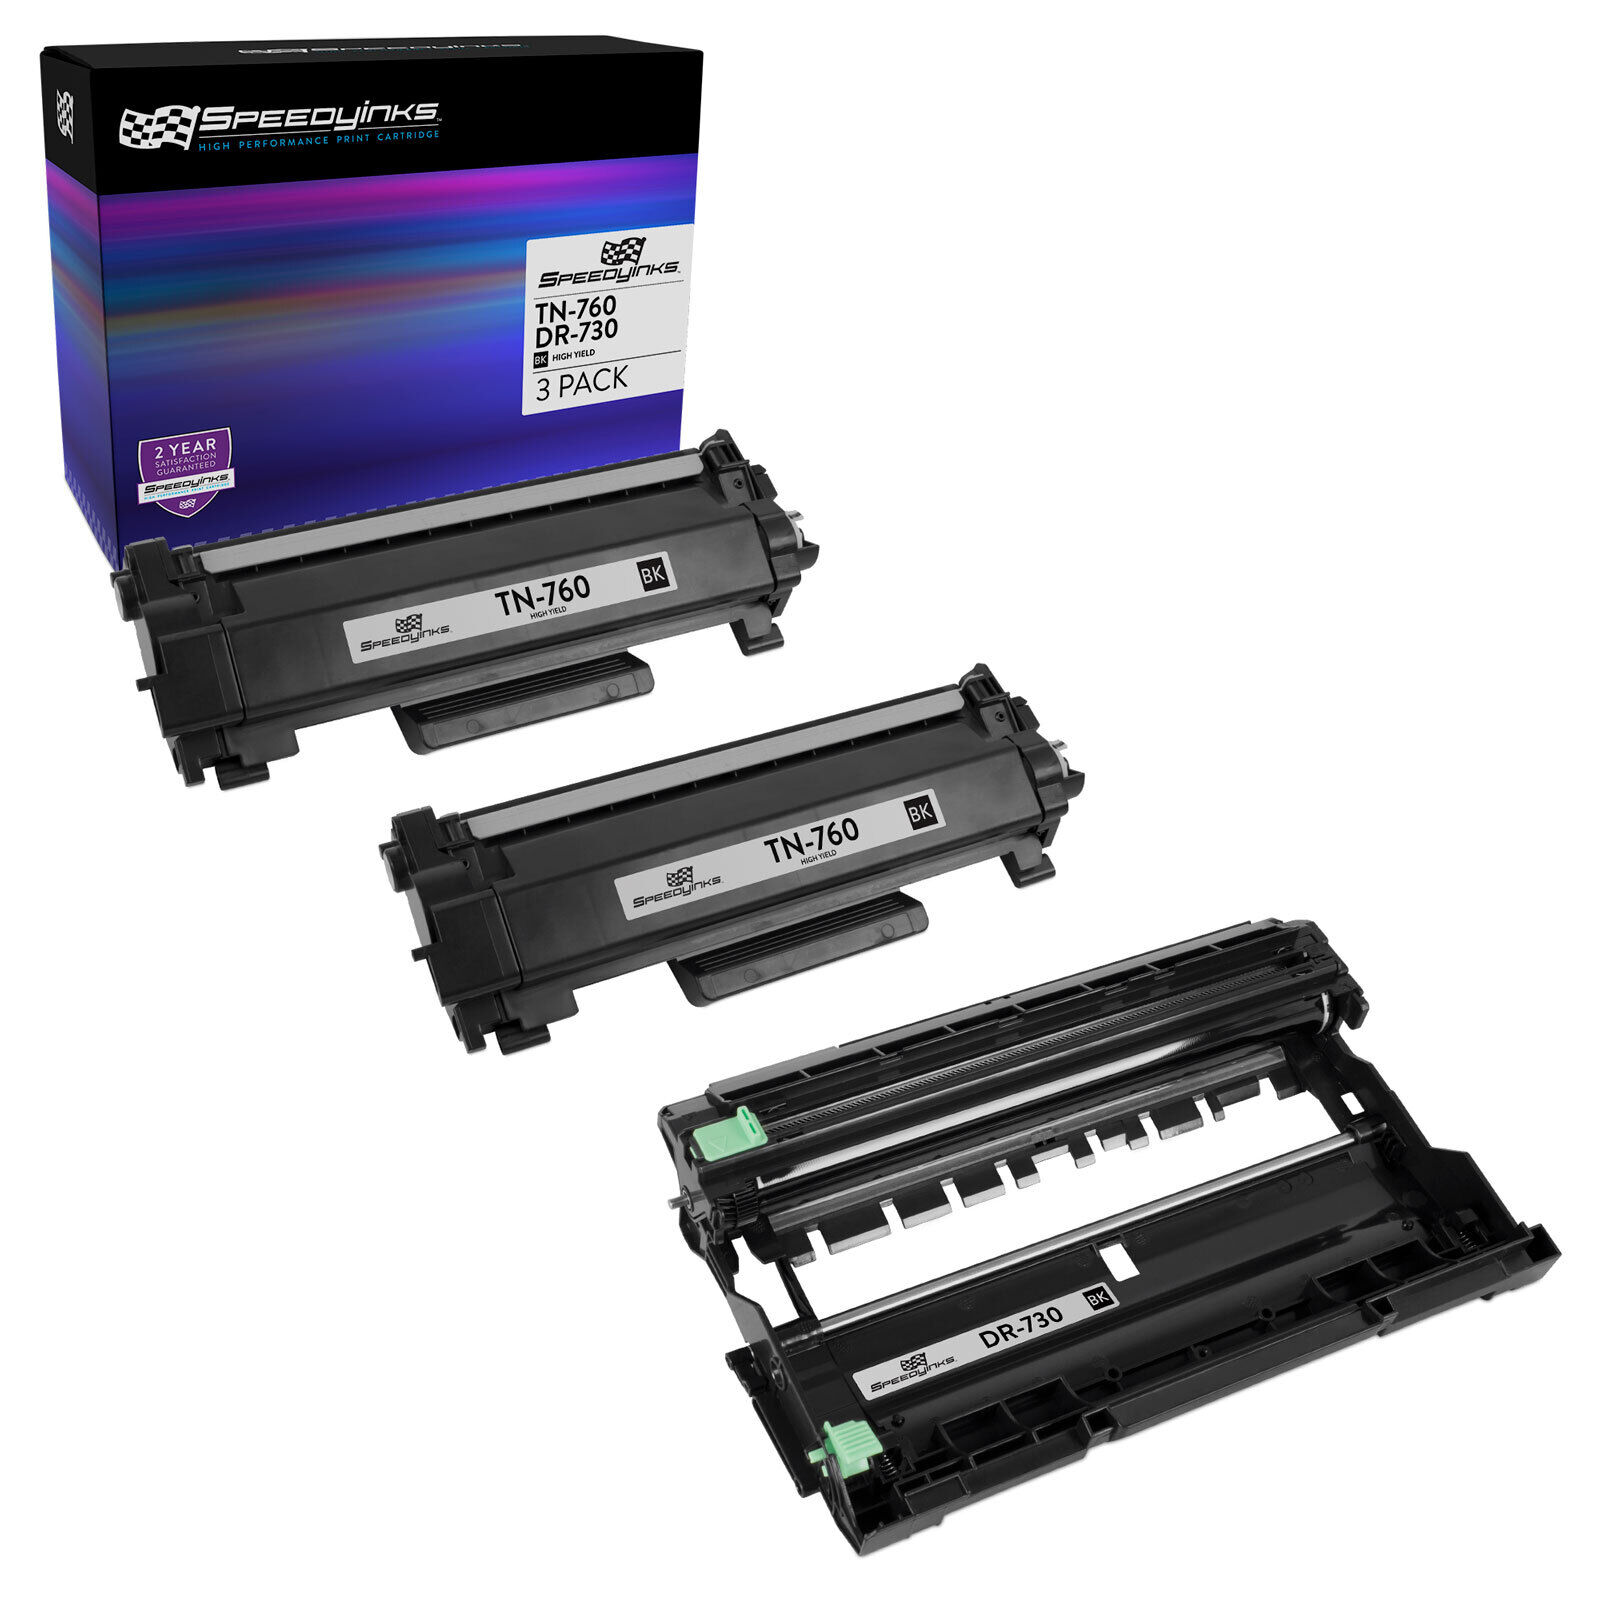 SPEEDYINKS 3PK Replacements for Brother TN760 Black Toner Cartridge & DR730 Drum